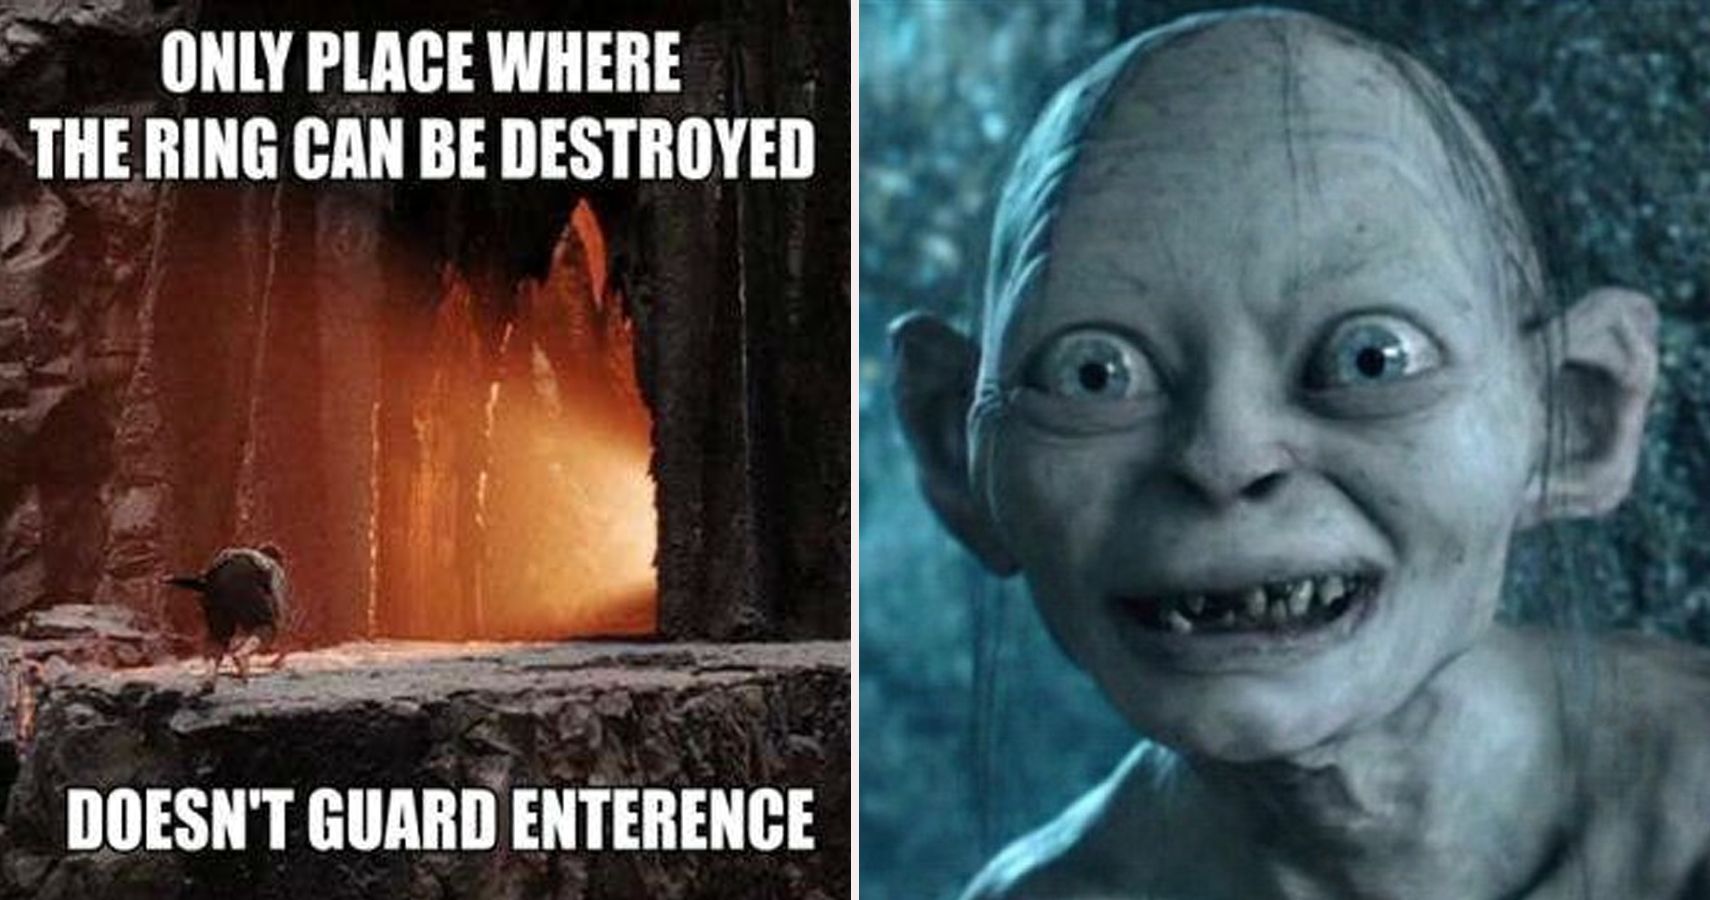 lord of the rings funny